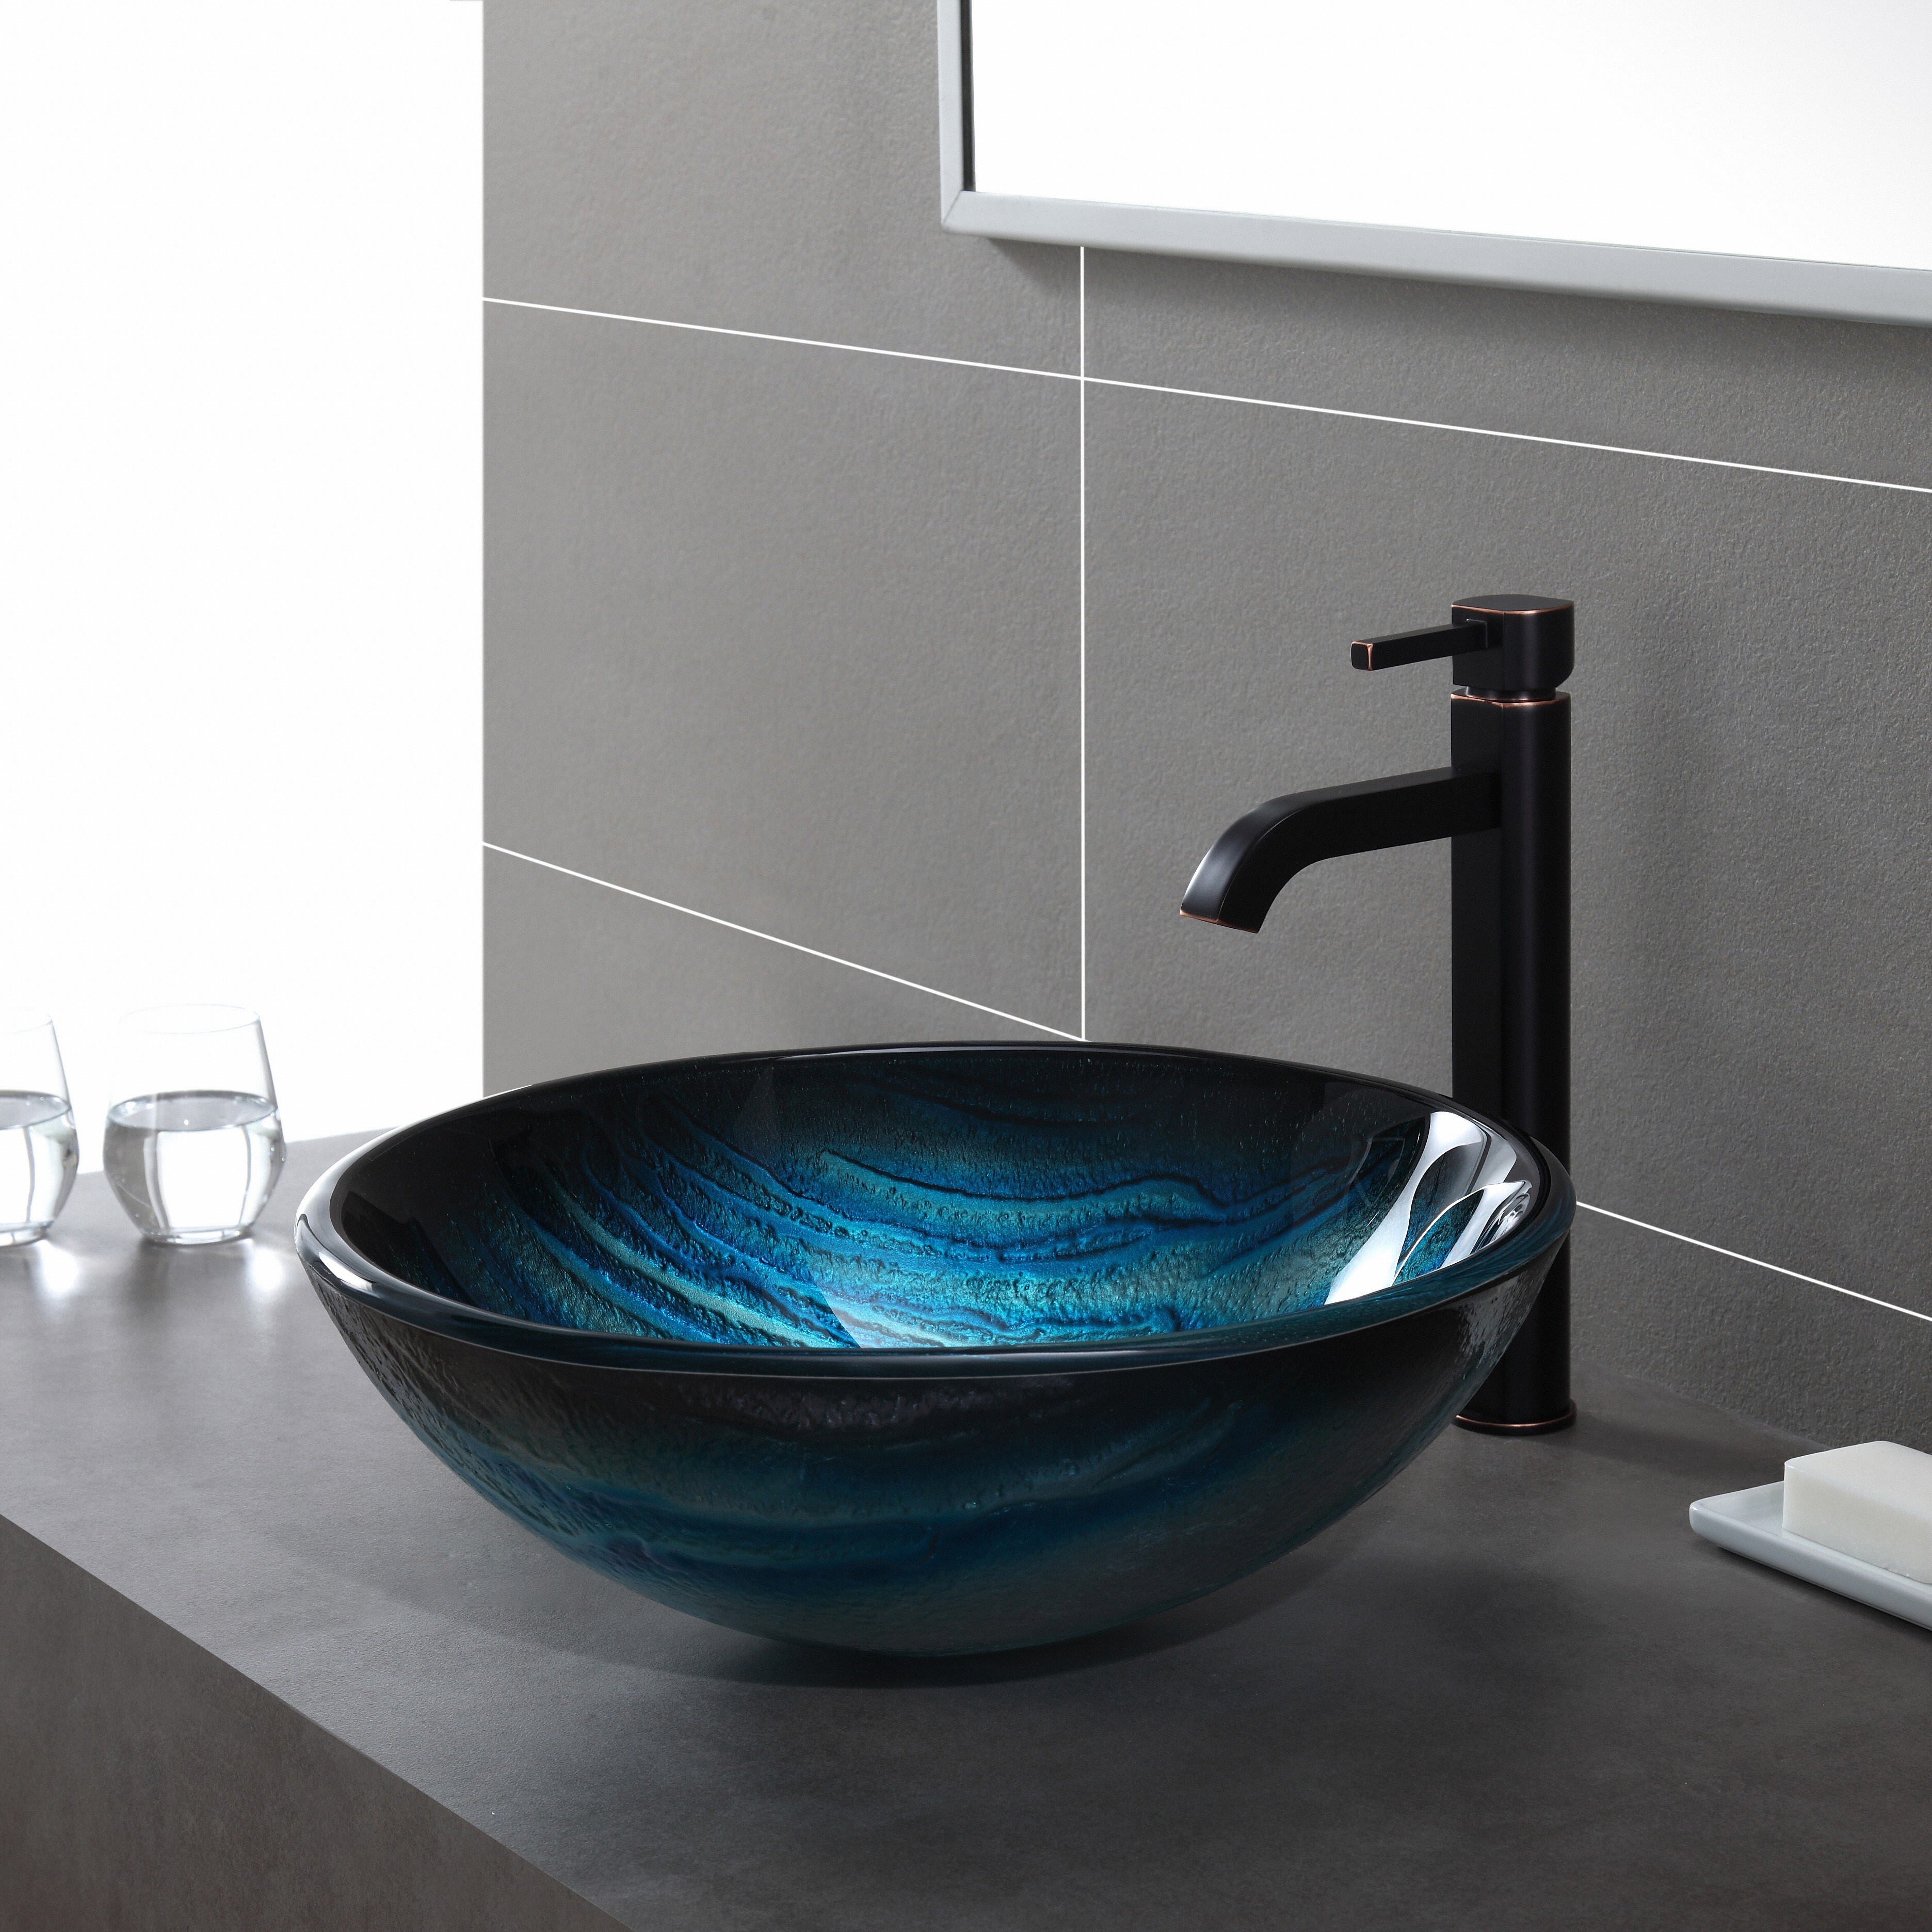 Kraus Vessel Sinks And Faucets Faucet Ideas Site